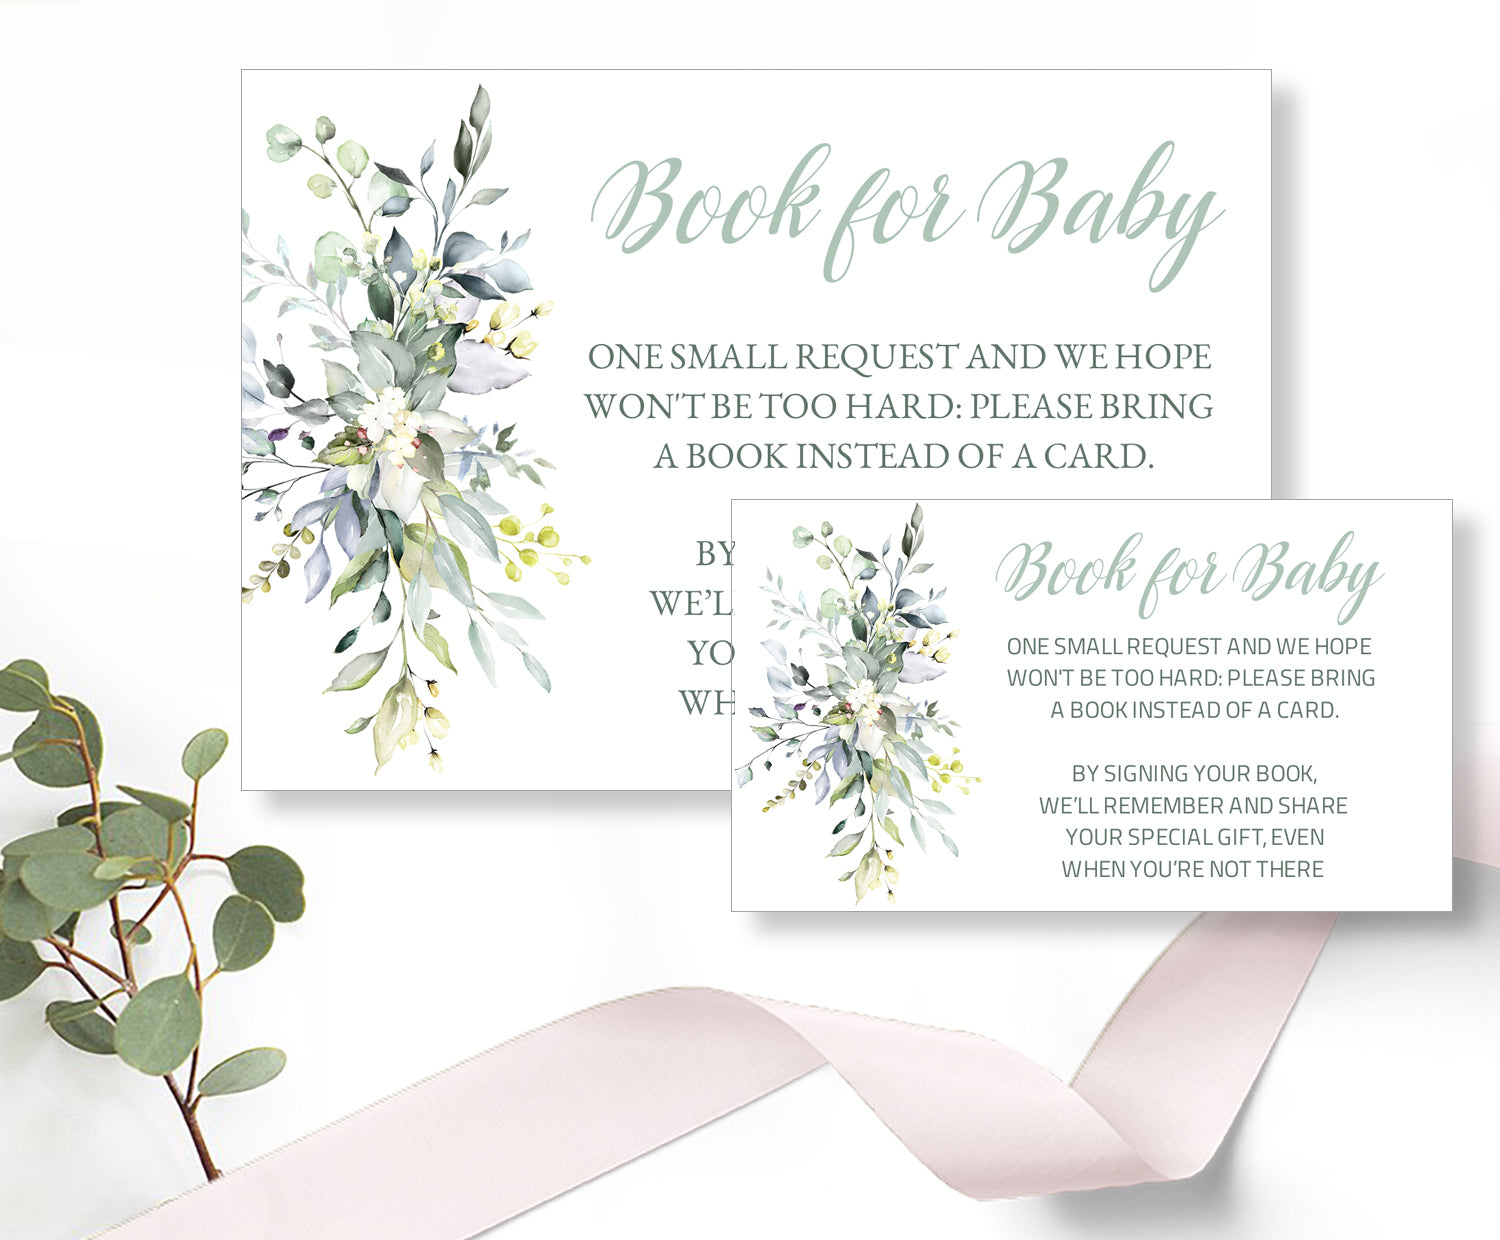 Baby Shower - Book for Baby Card Template - Greenery Bouquet Design, Baby06 - CalissaPrints